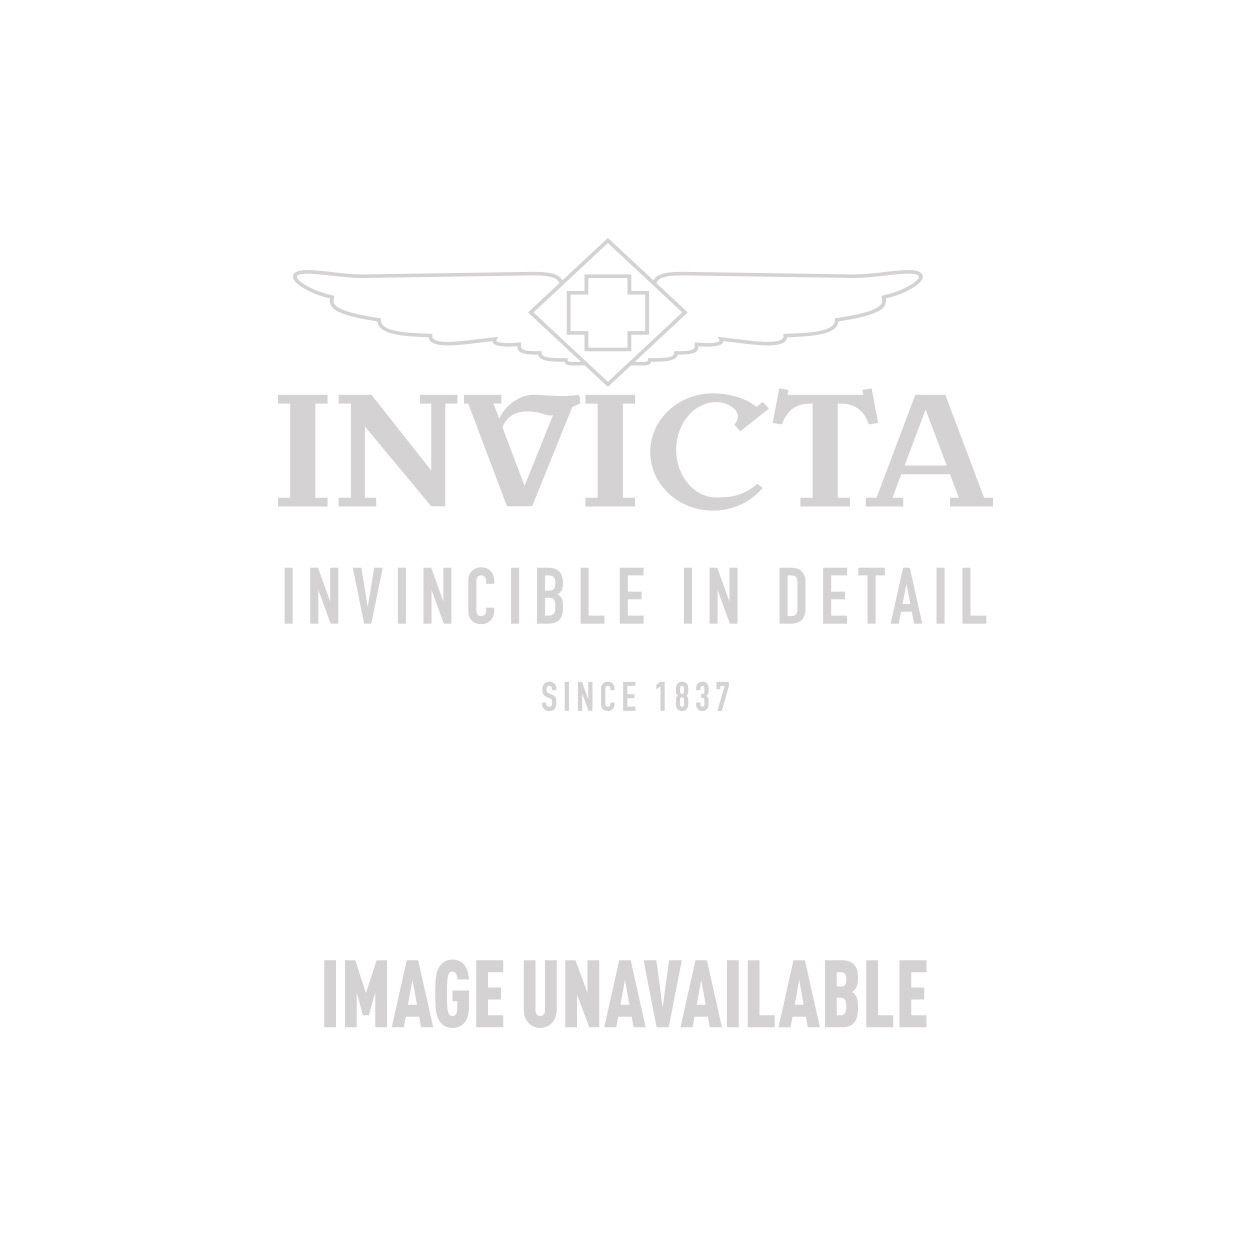 Invicta Aviator Quartz Watch - Gold case with Gold tone Stainless Steel band - Model 18855